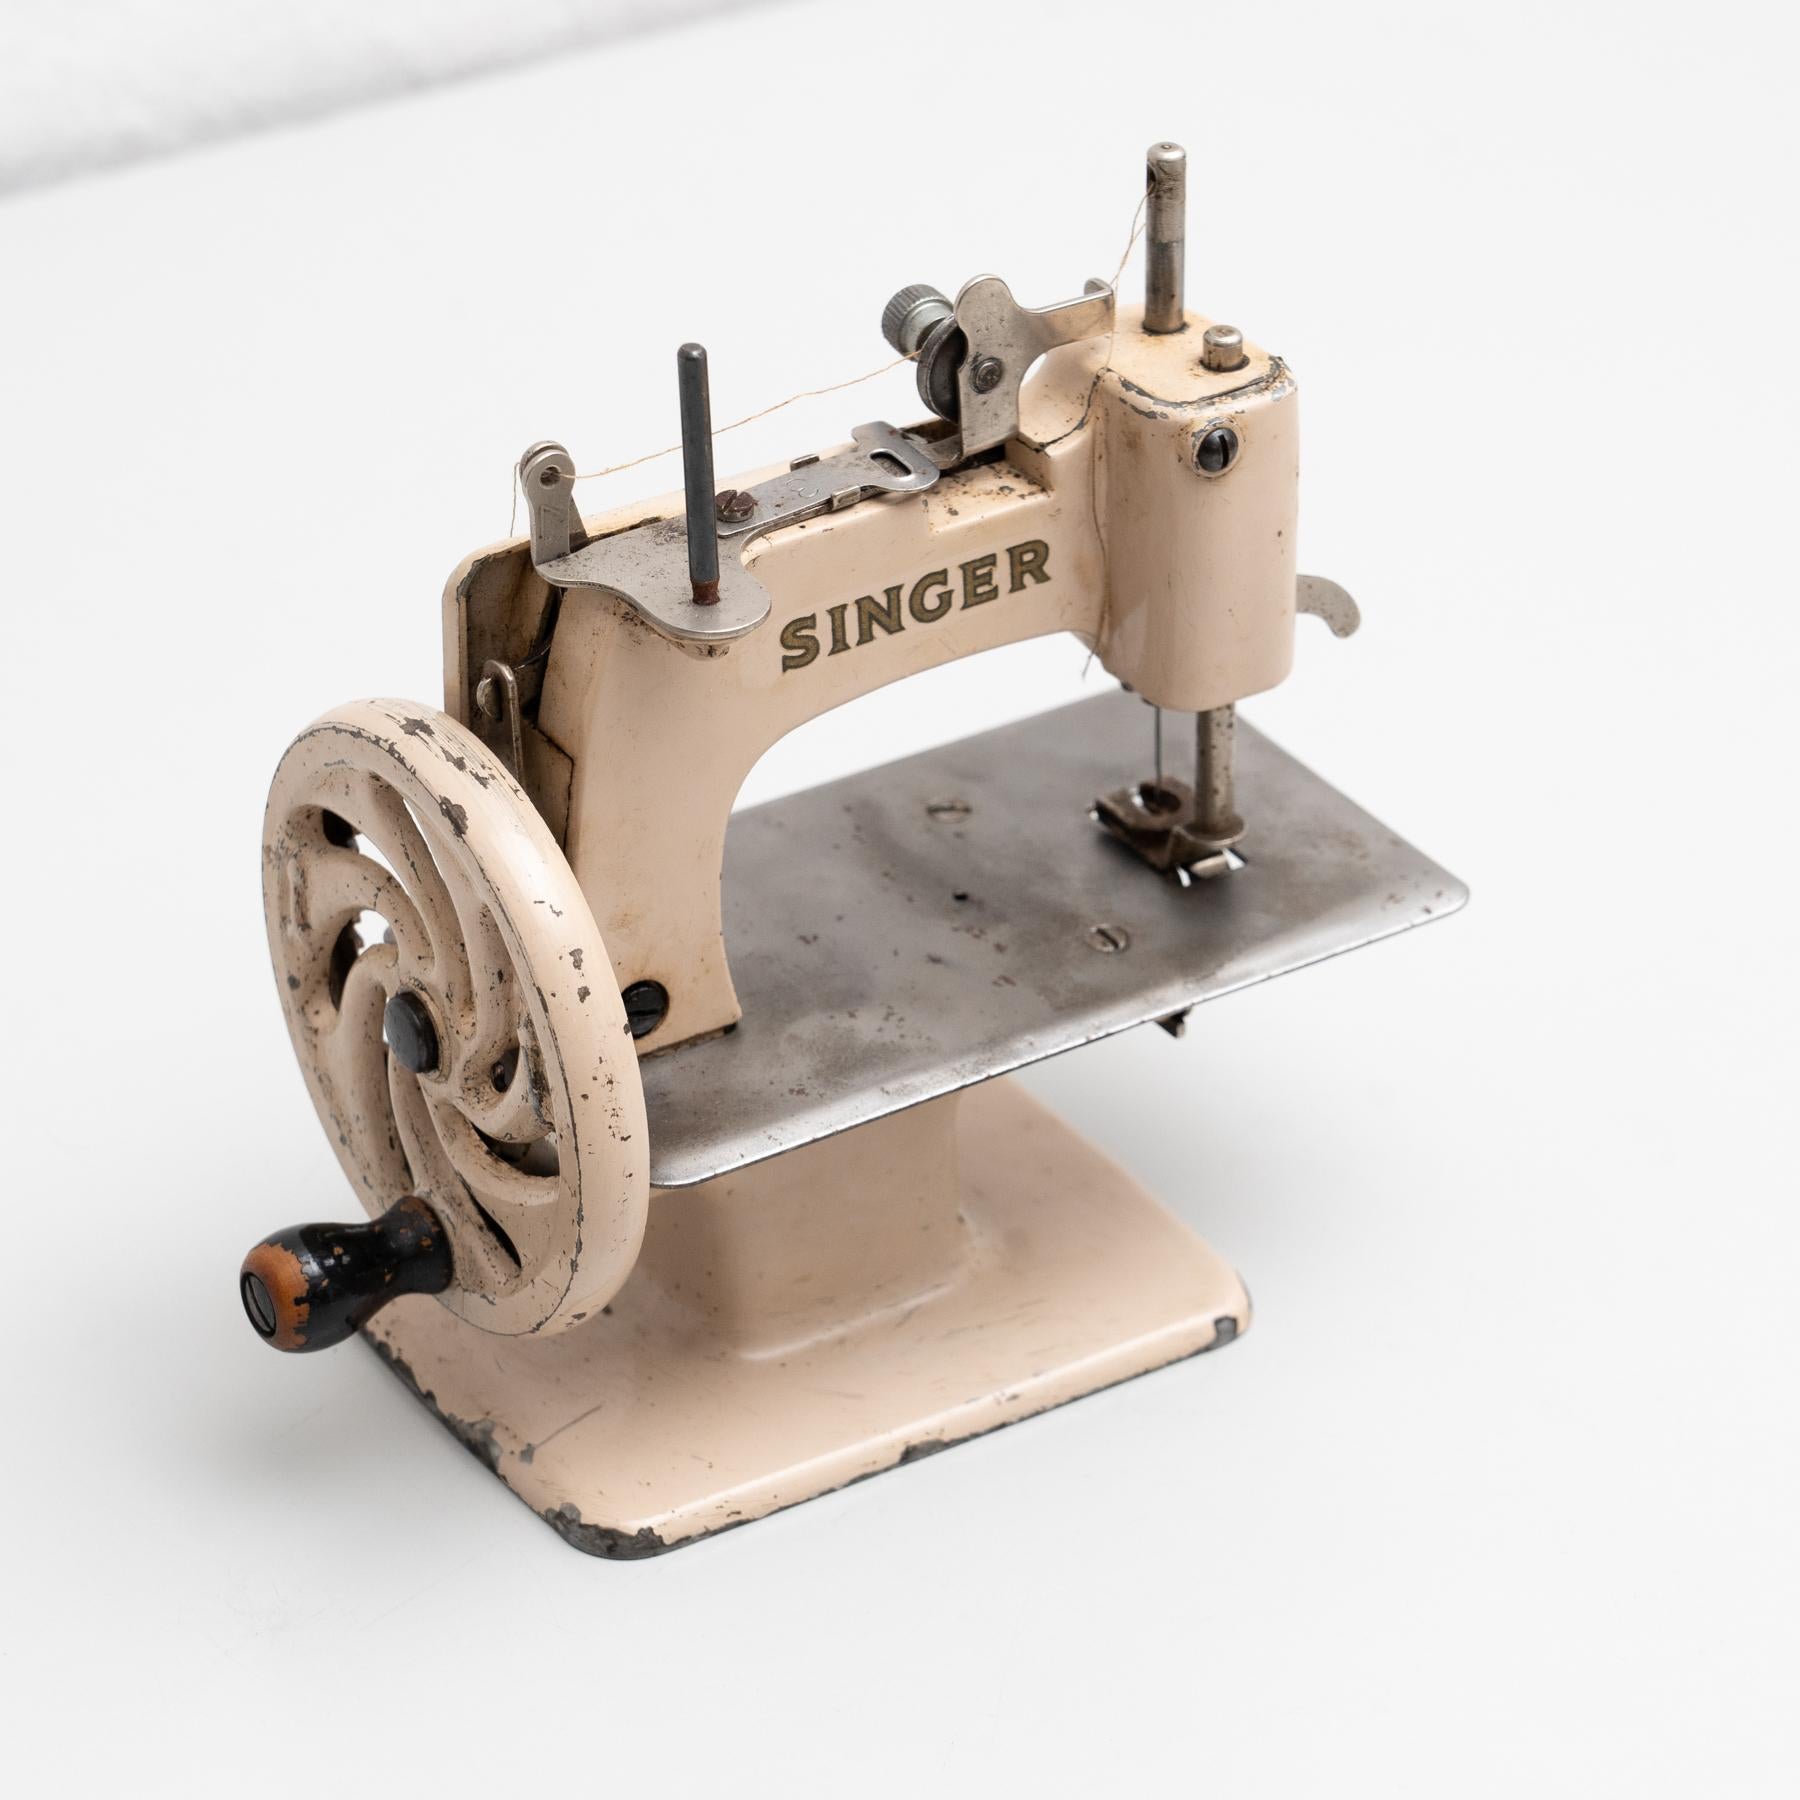 Antique Century Traditional Toy Singer Sewing Machine Reproduction, circa 1950 For Sale 6